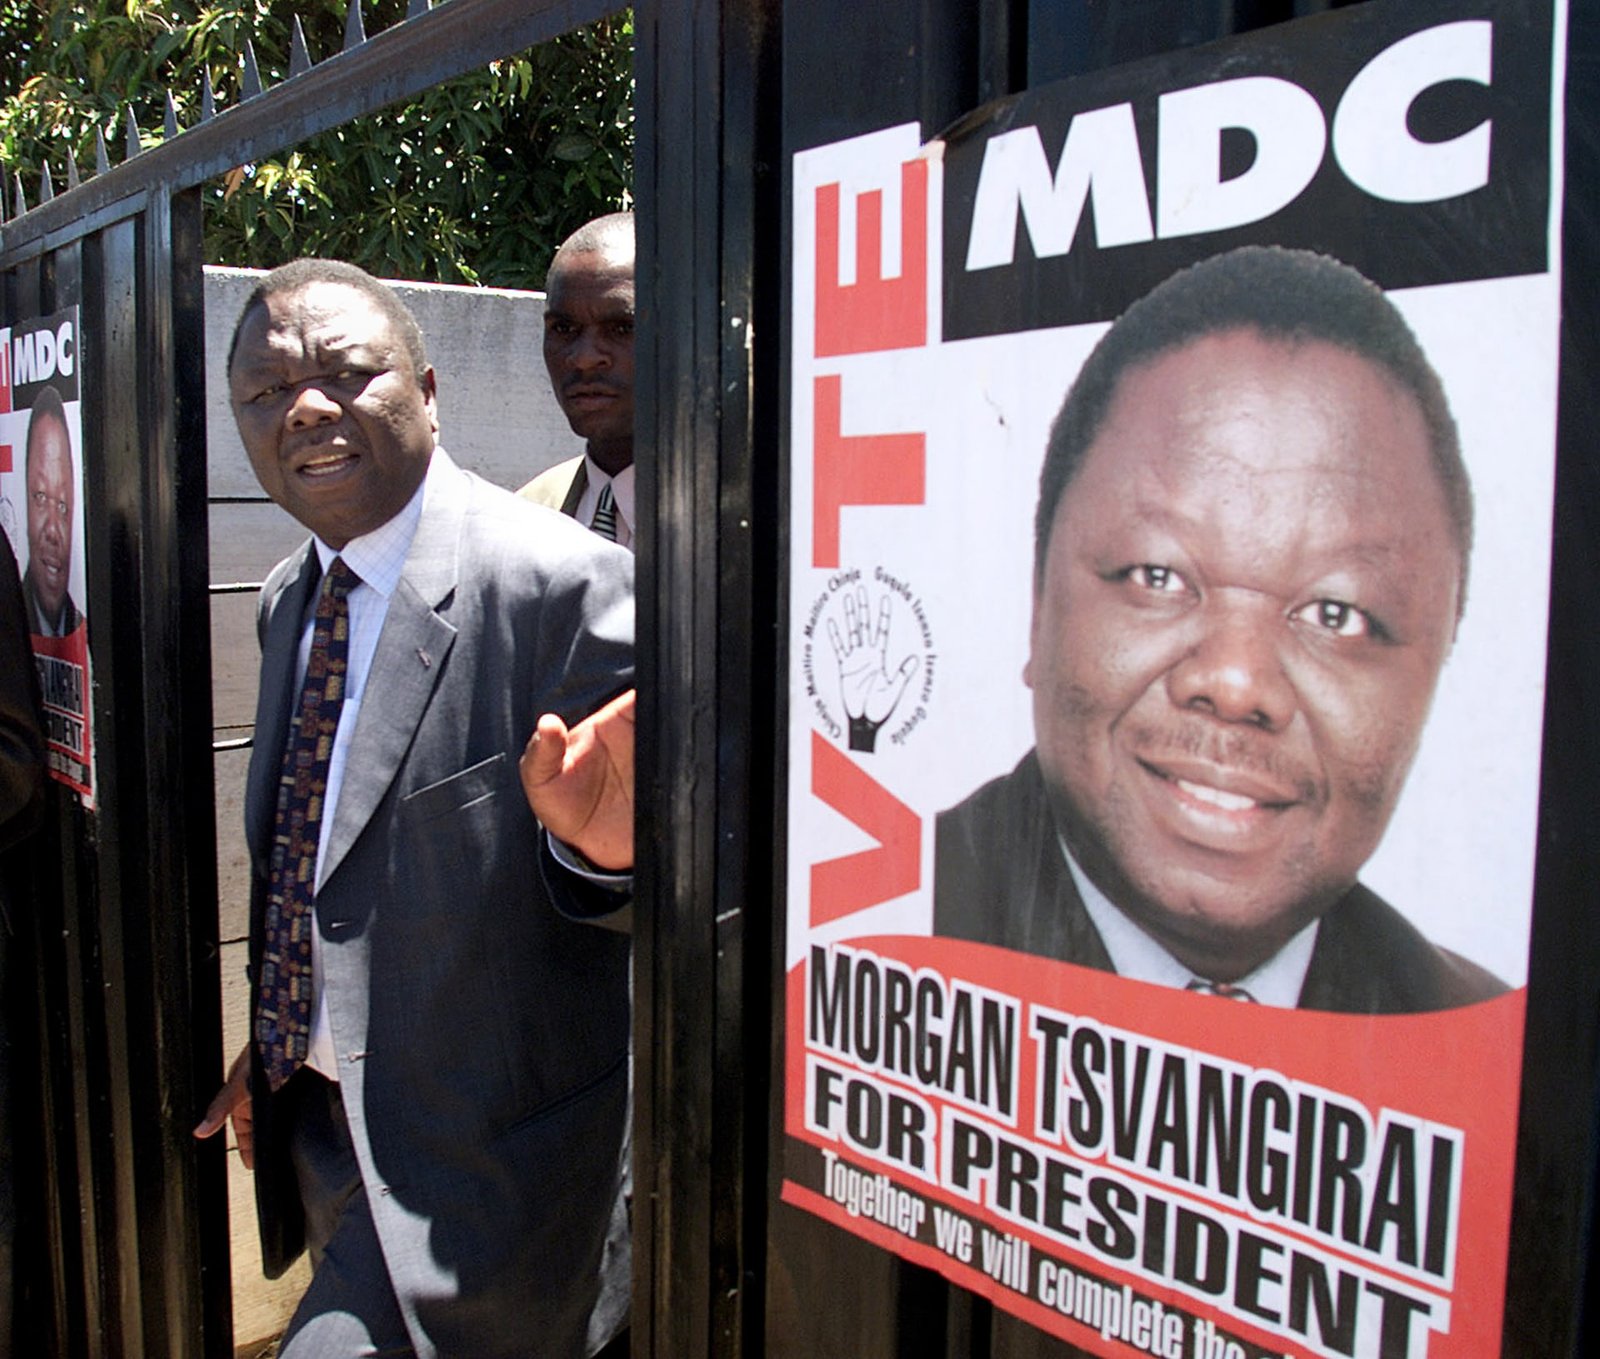 Tsvangirai leaves the house of MDC MP Tafadzwa Musekiwa in February 2002 after it was attacked by Zanu PF supporters | Report Focus News